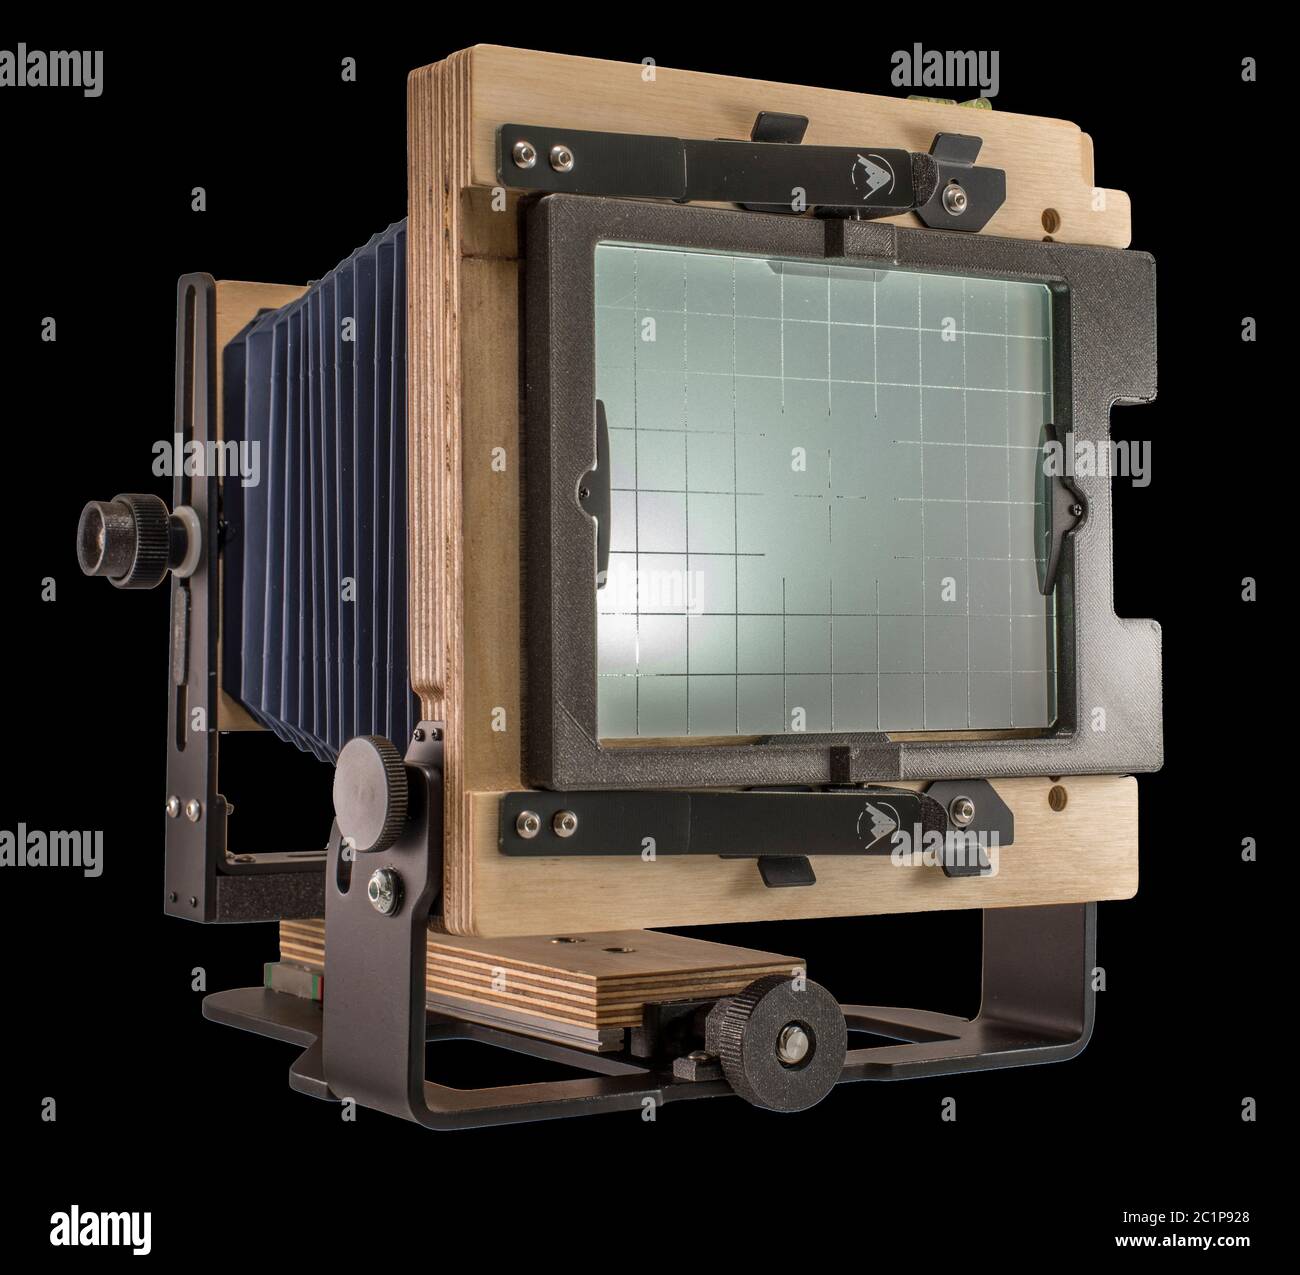 Intrepid 4X5 Mark IV Plywood Folding Field Film Camera on Plain Black Background for Easy Isolation and Cutout Stock Photo